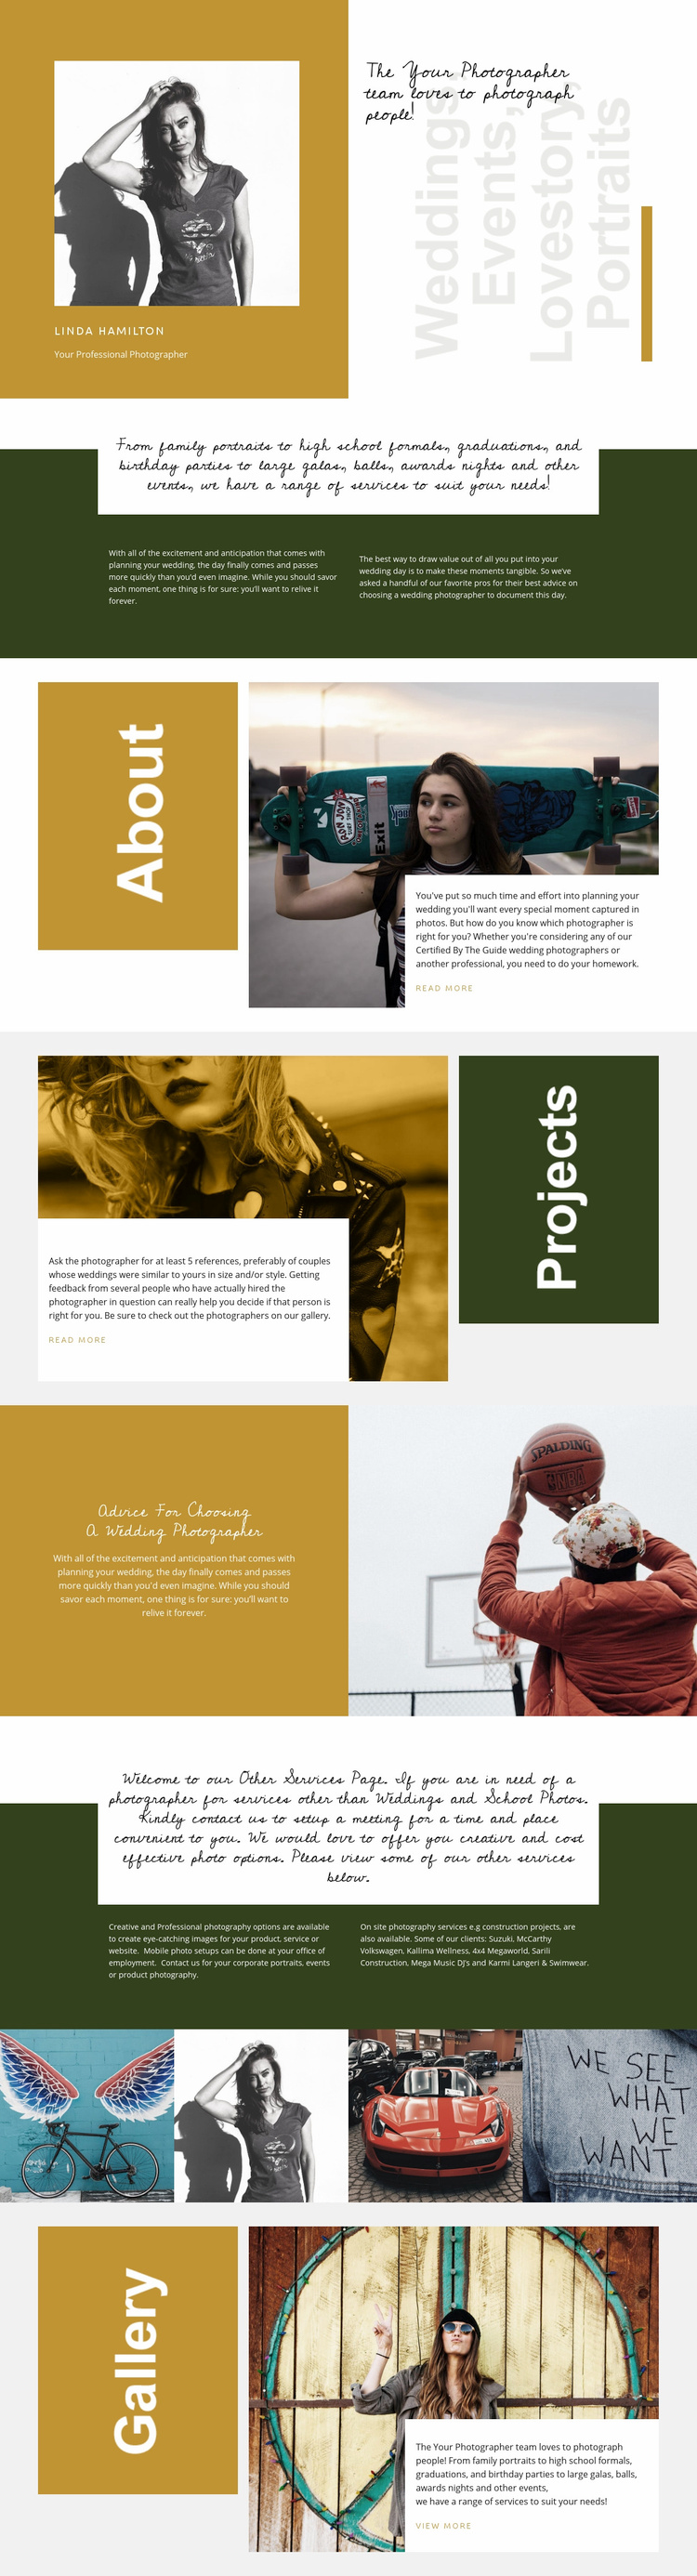 Fashion photography courses Wix Template Alternative